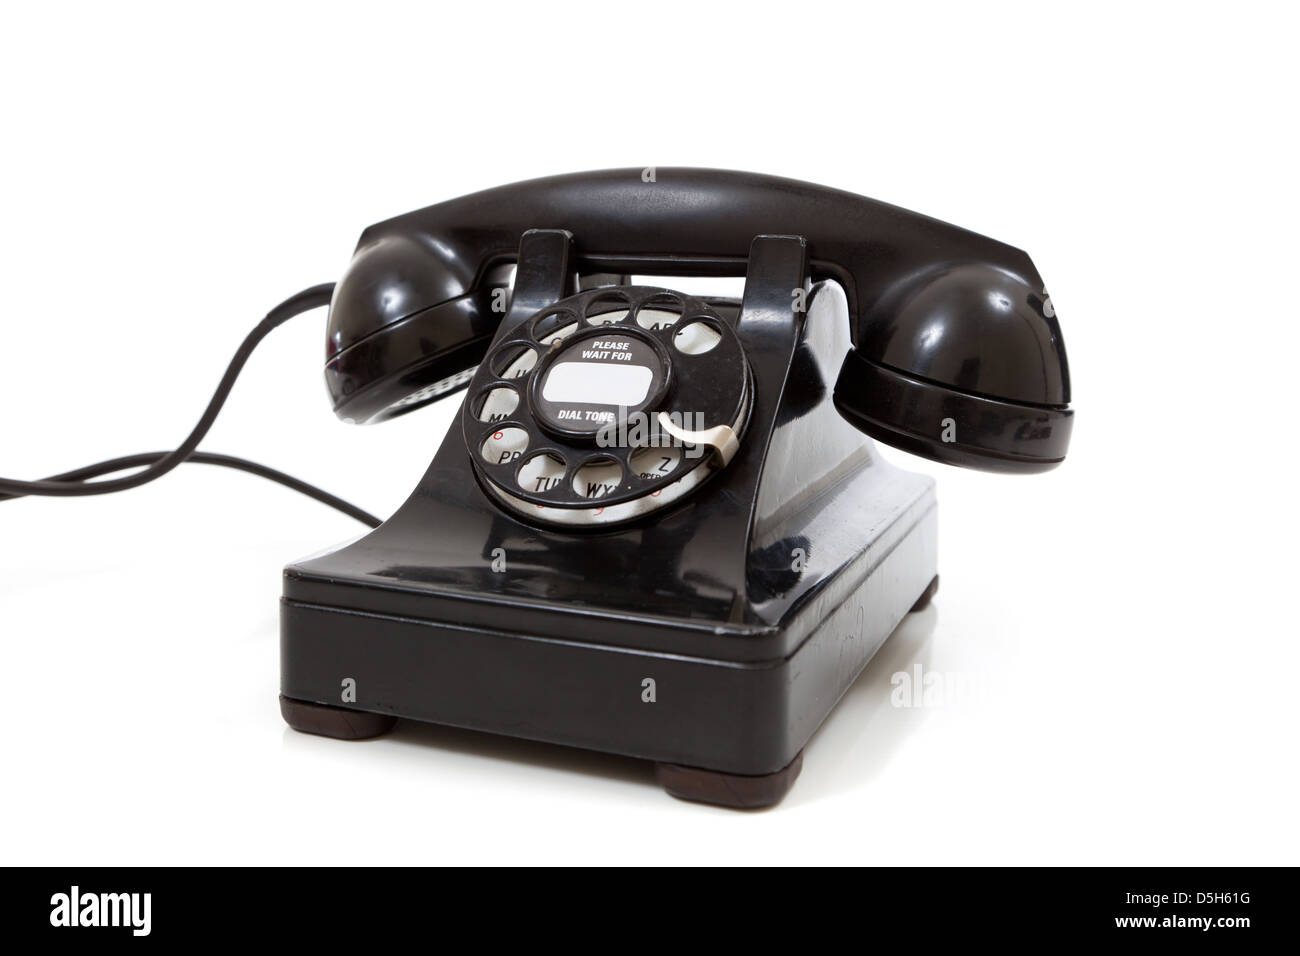 A black vintage rotary phone on a white background Stock Photo